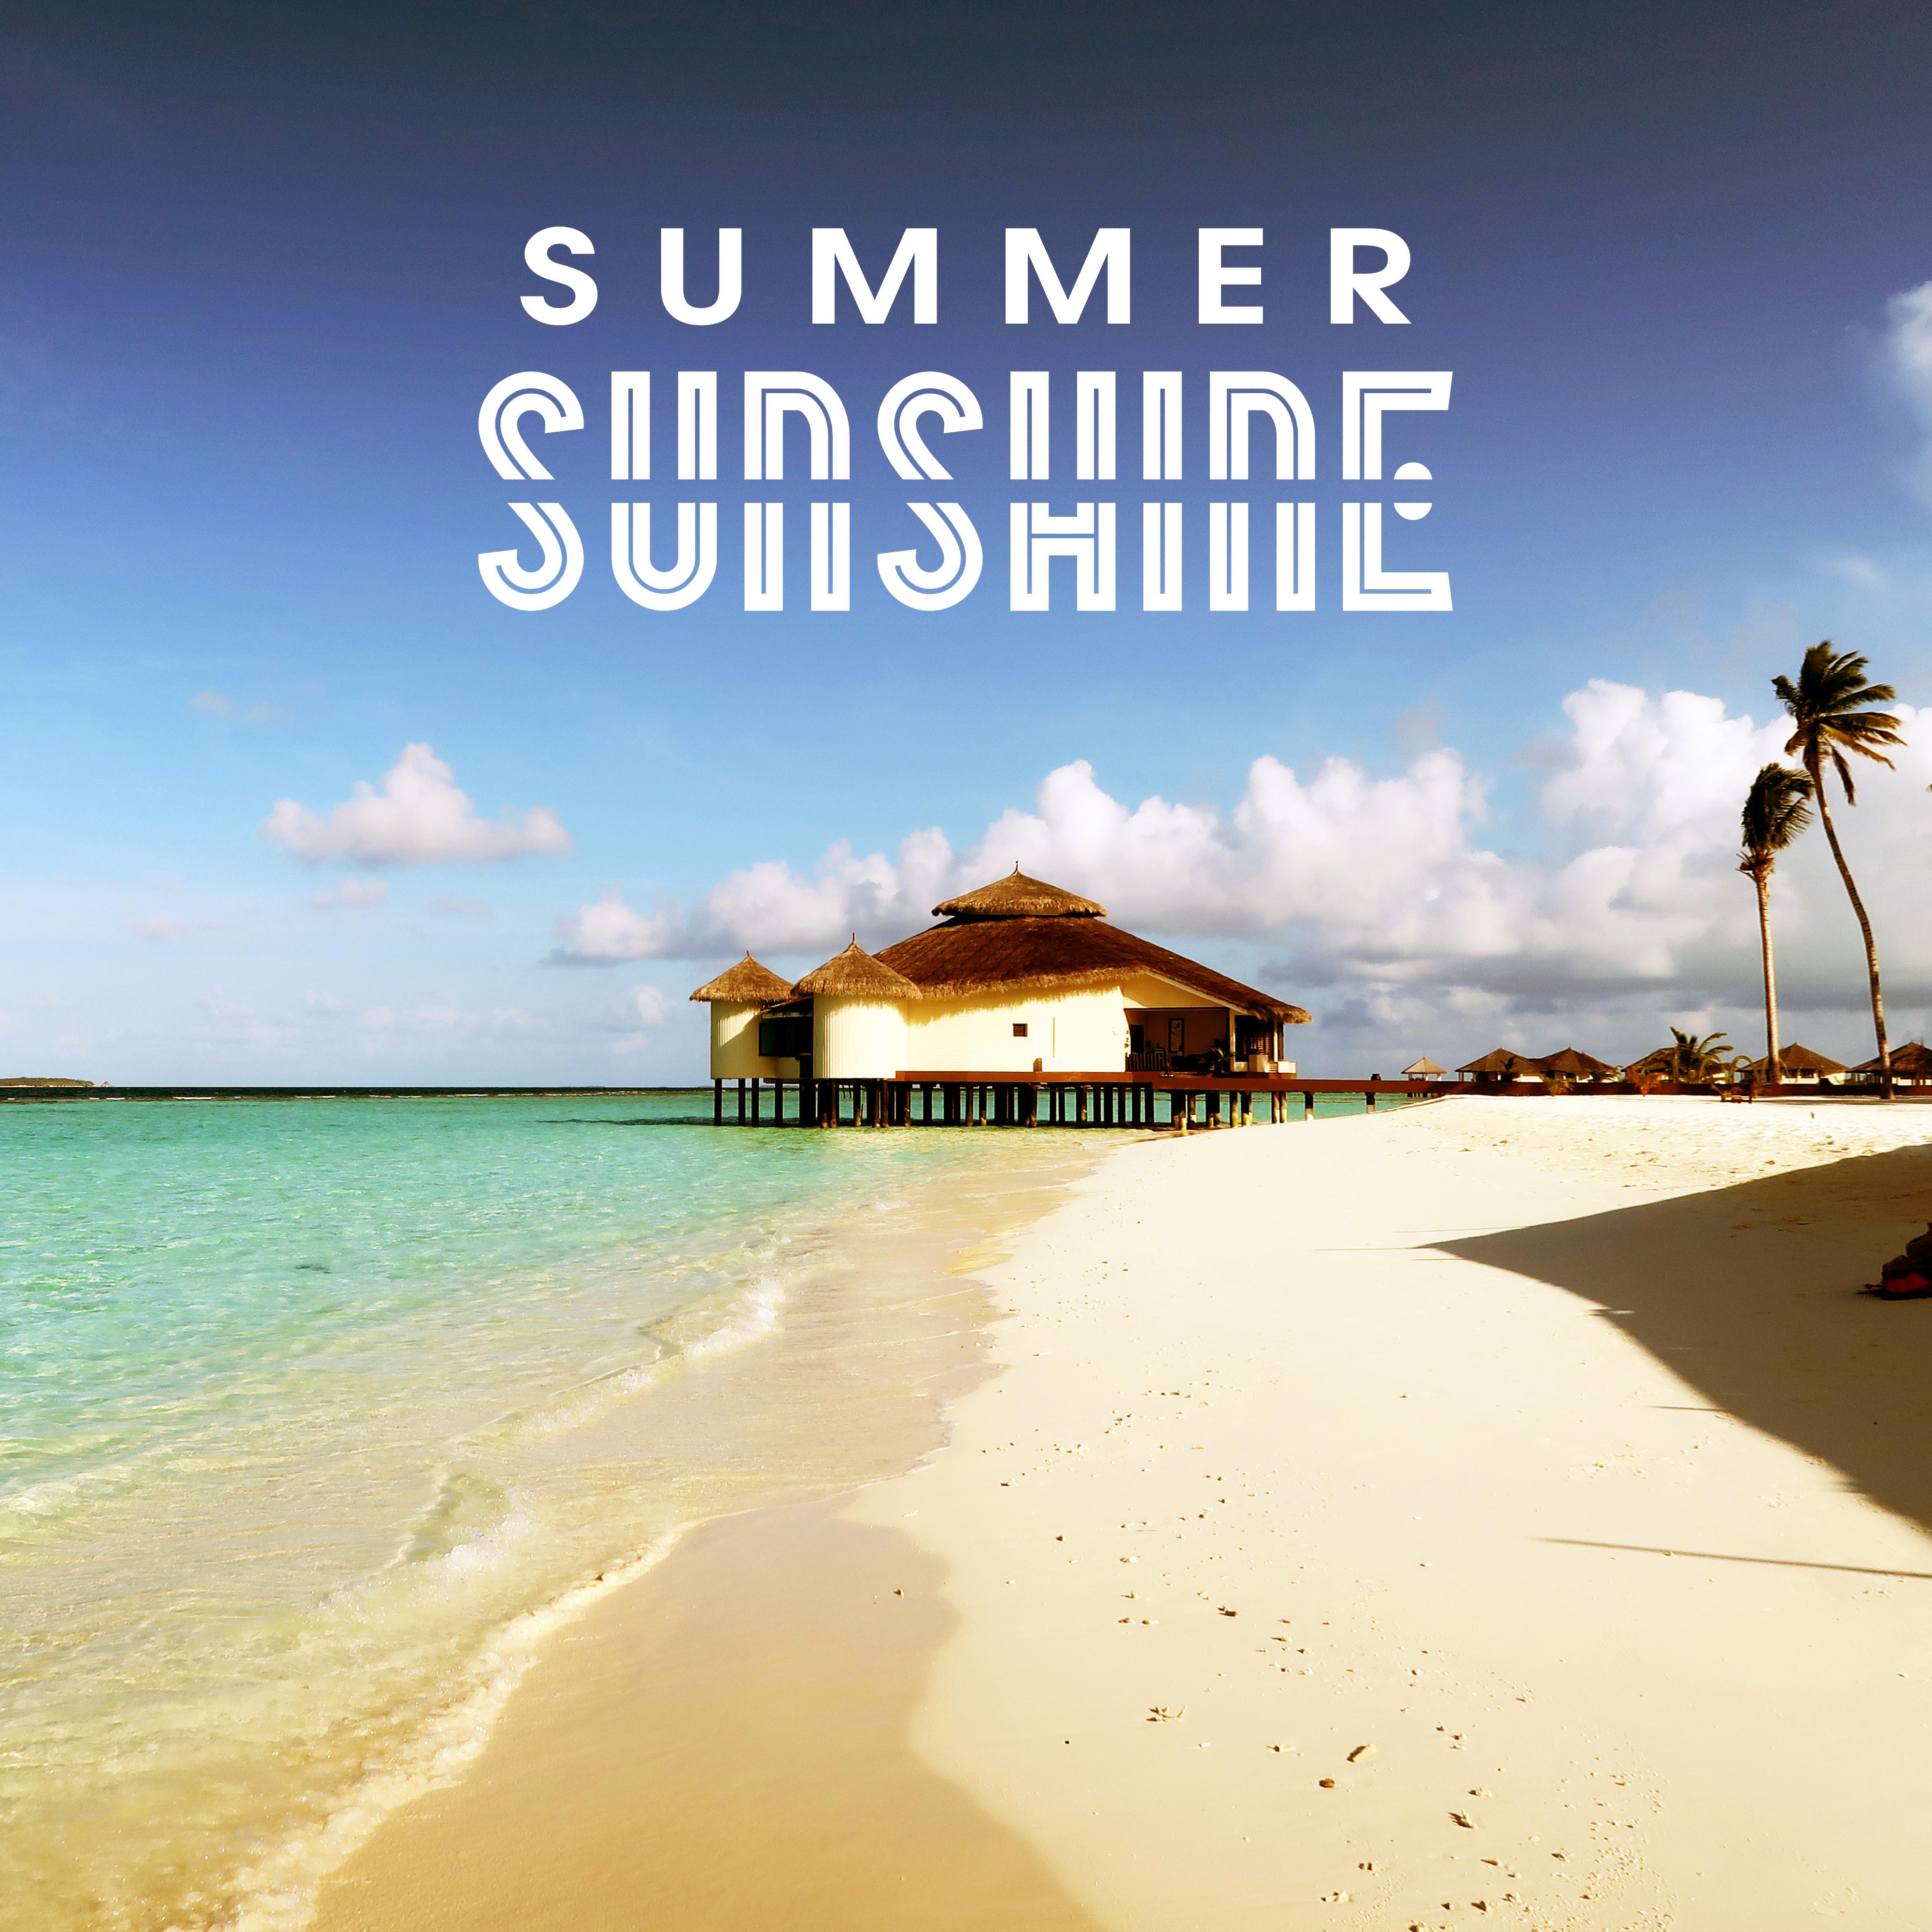 Summer Sunshine – Easy Listening, Summer Relaxation, Peaceful Holidays, Music to Rest